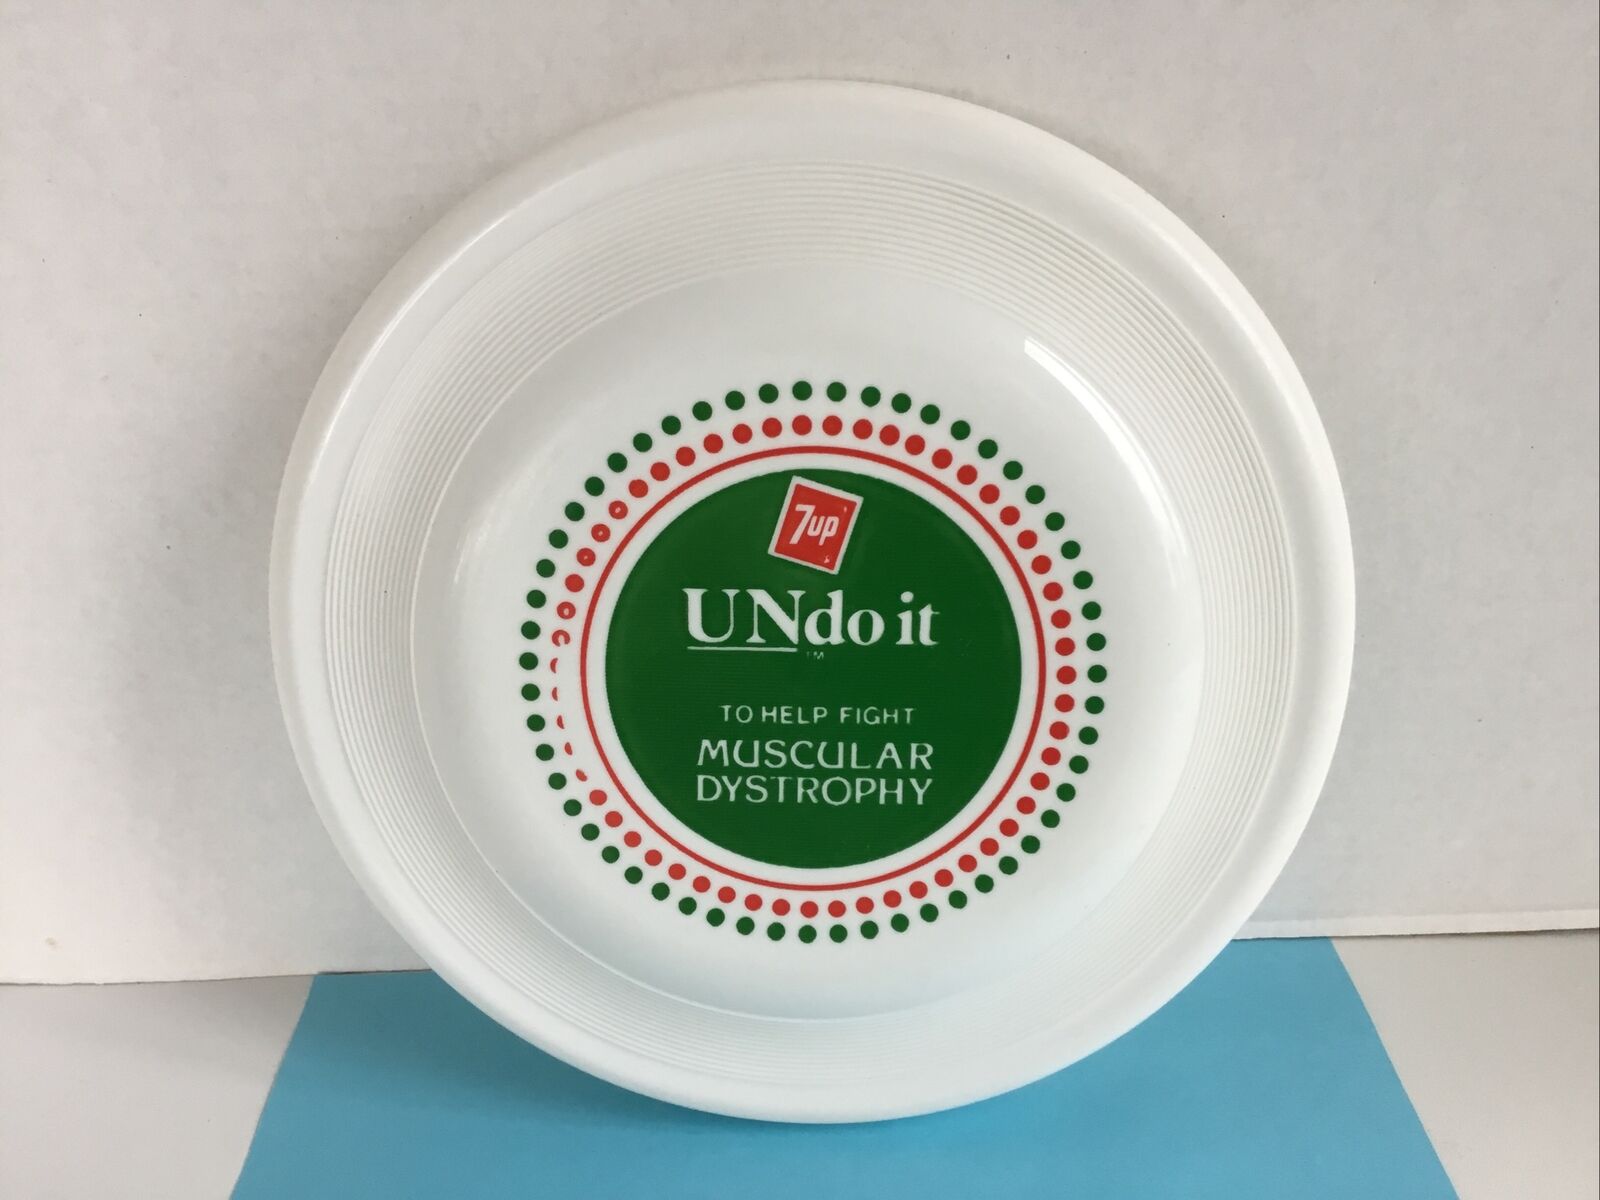 Vtg Wham-O Frisbee 7up Undo it to Help Fight Muscular Distrophy Promo Ad 1975 